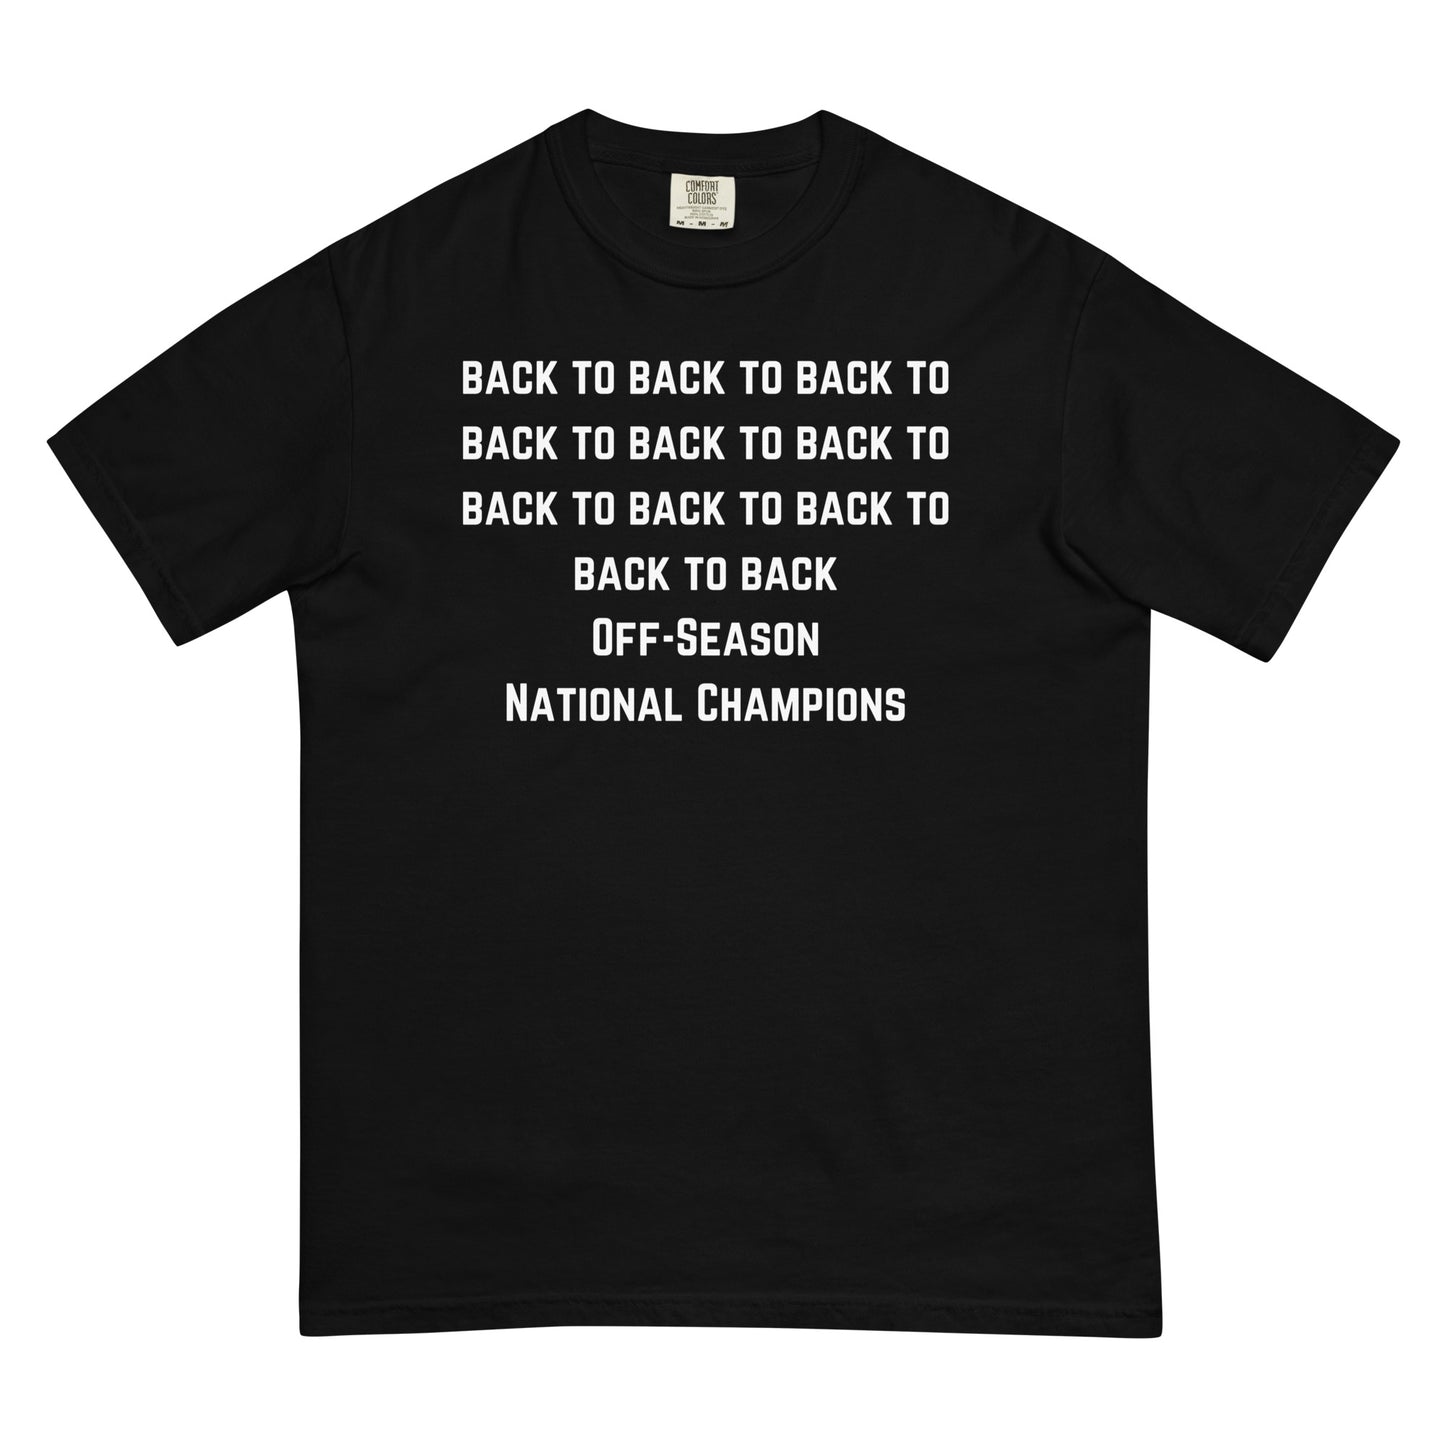 Back to Back to Back T-shirt